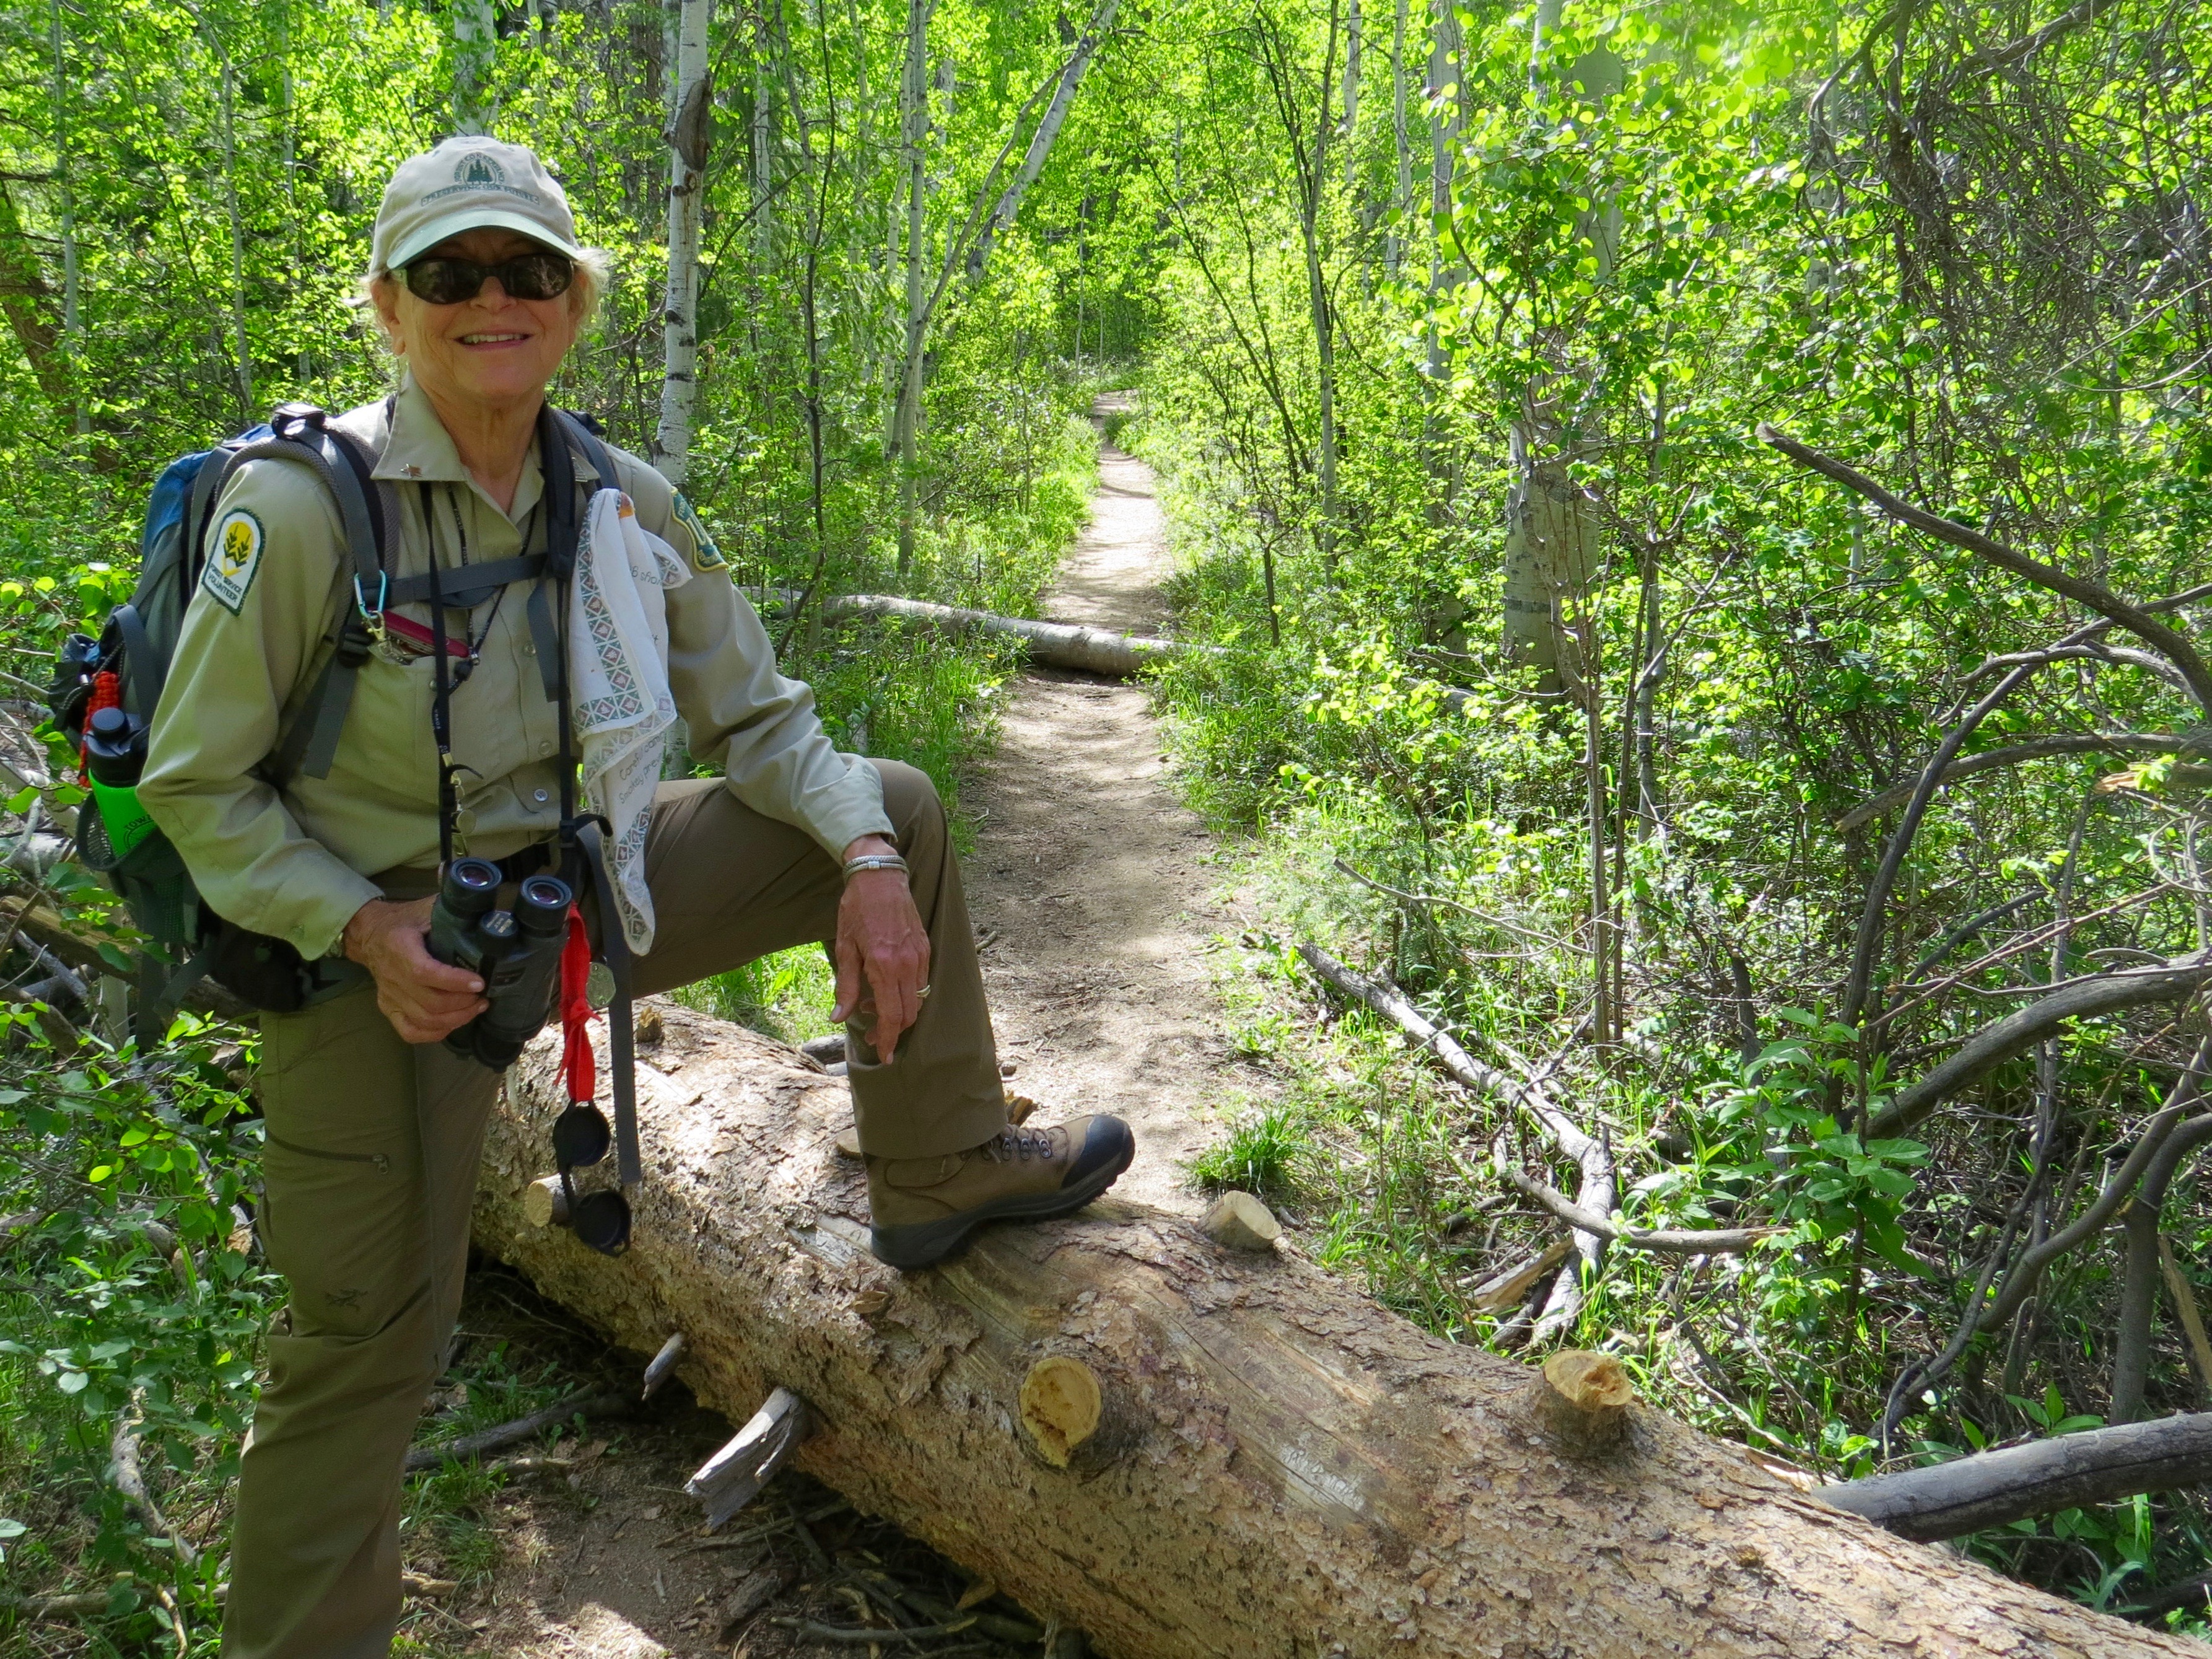 In June we volunteers check the trails for fallen trees and report back to the USFS. They send crews to clear the  pathways.  My friend, Donna Grauer and I thought these logs were a bit too much for us.  